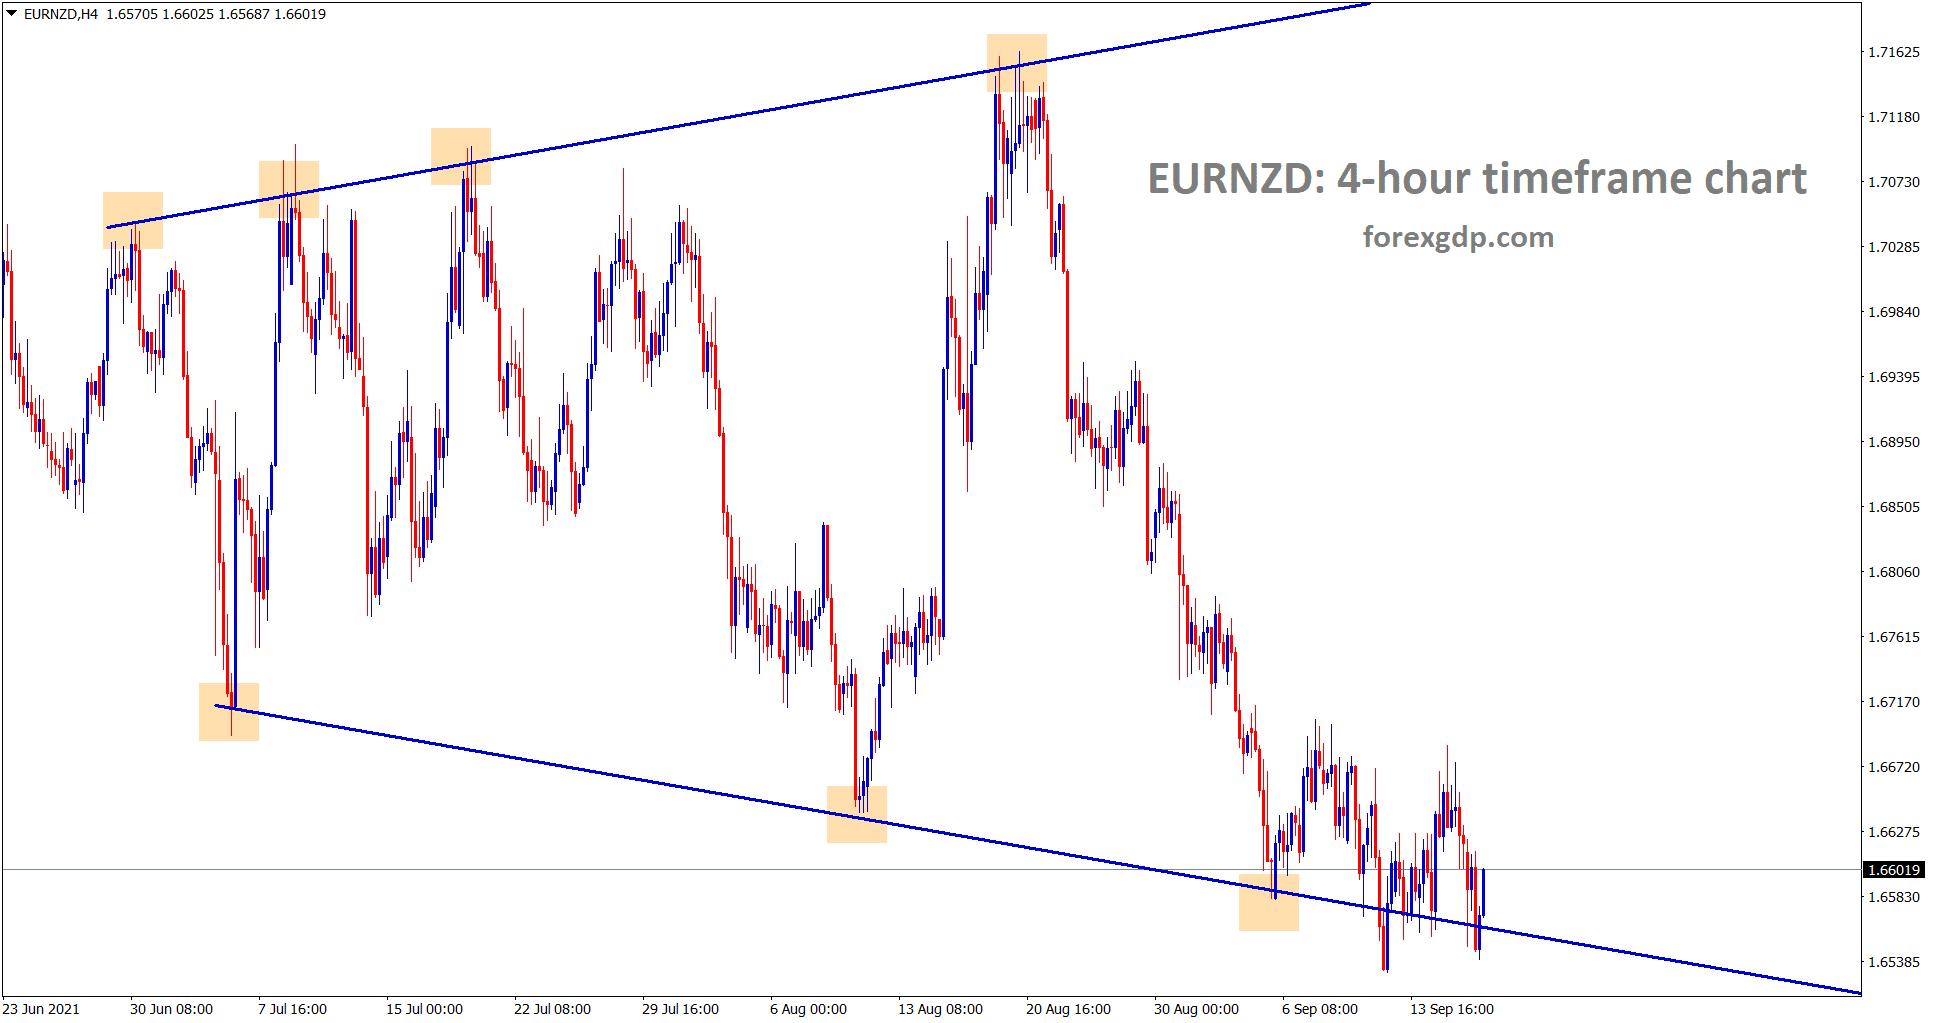 EURNZD is still struggling to rise or break from the low level of the expanding triangle